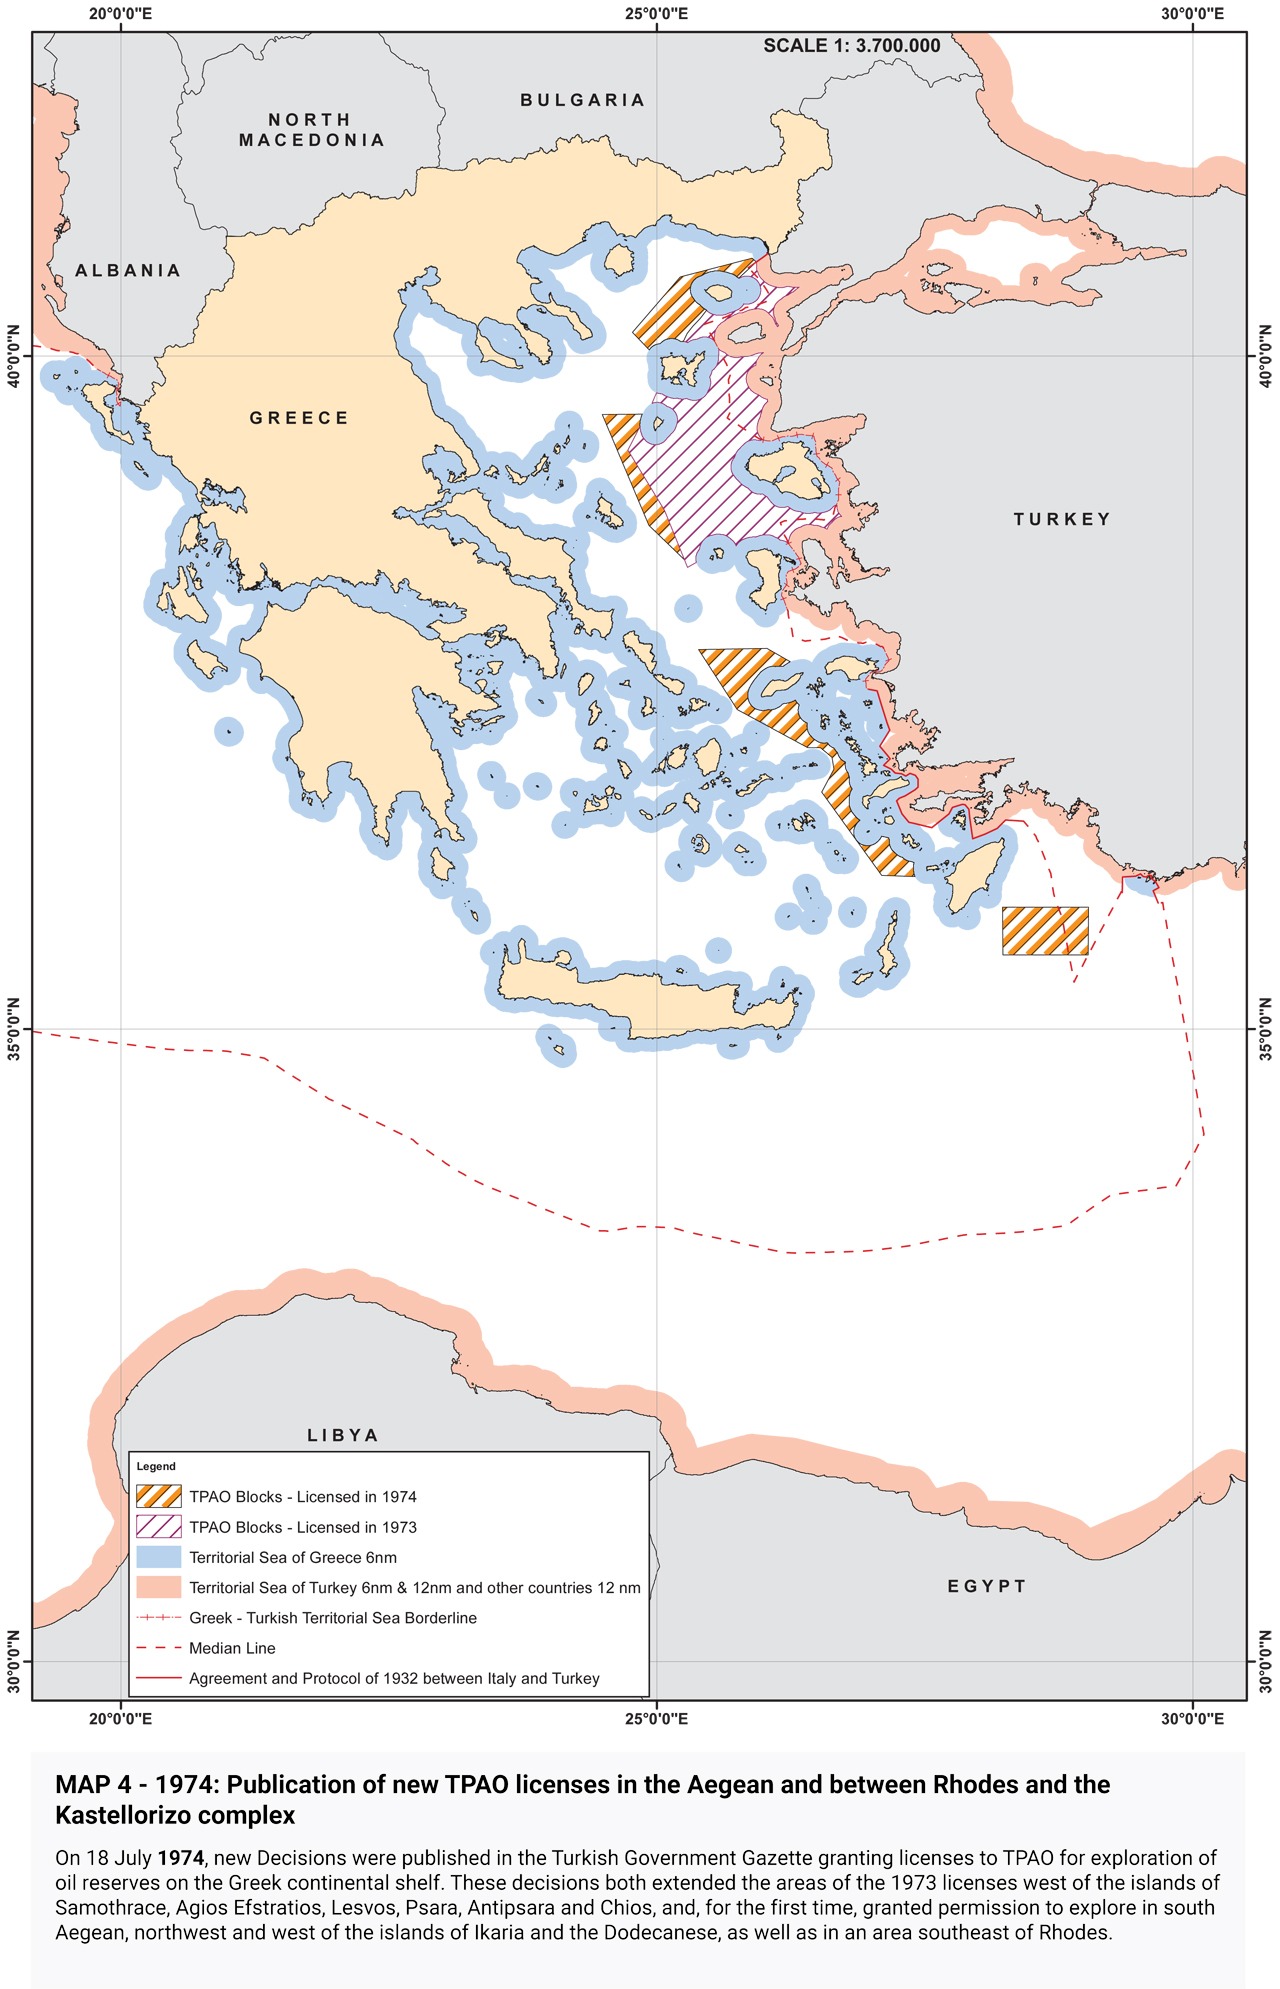 greece-responds-to-turkish-claims-about-islands-with-maps7